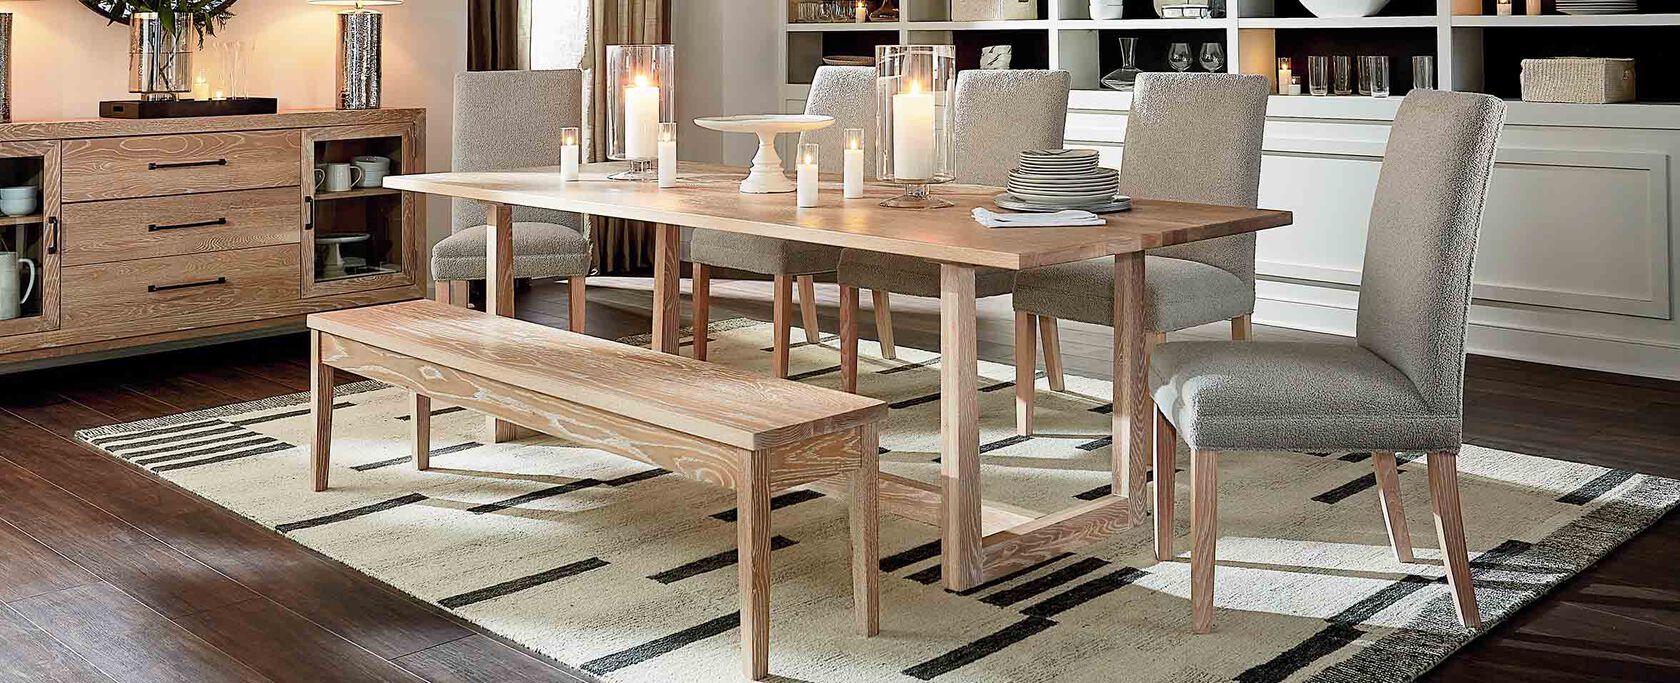 Wood dining table, bench with upholstered chairs